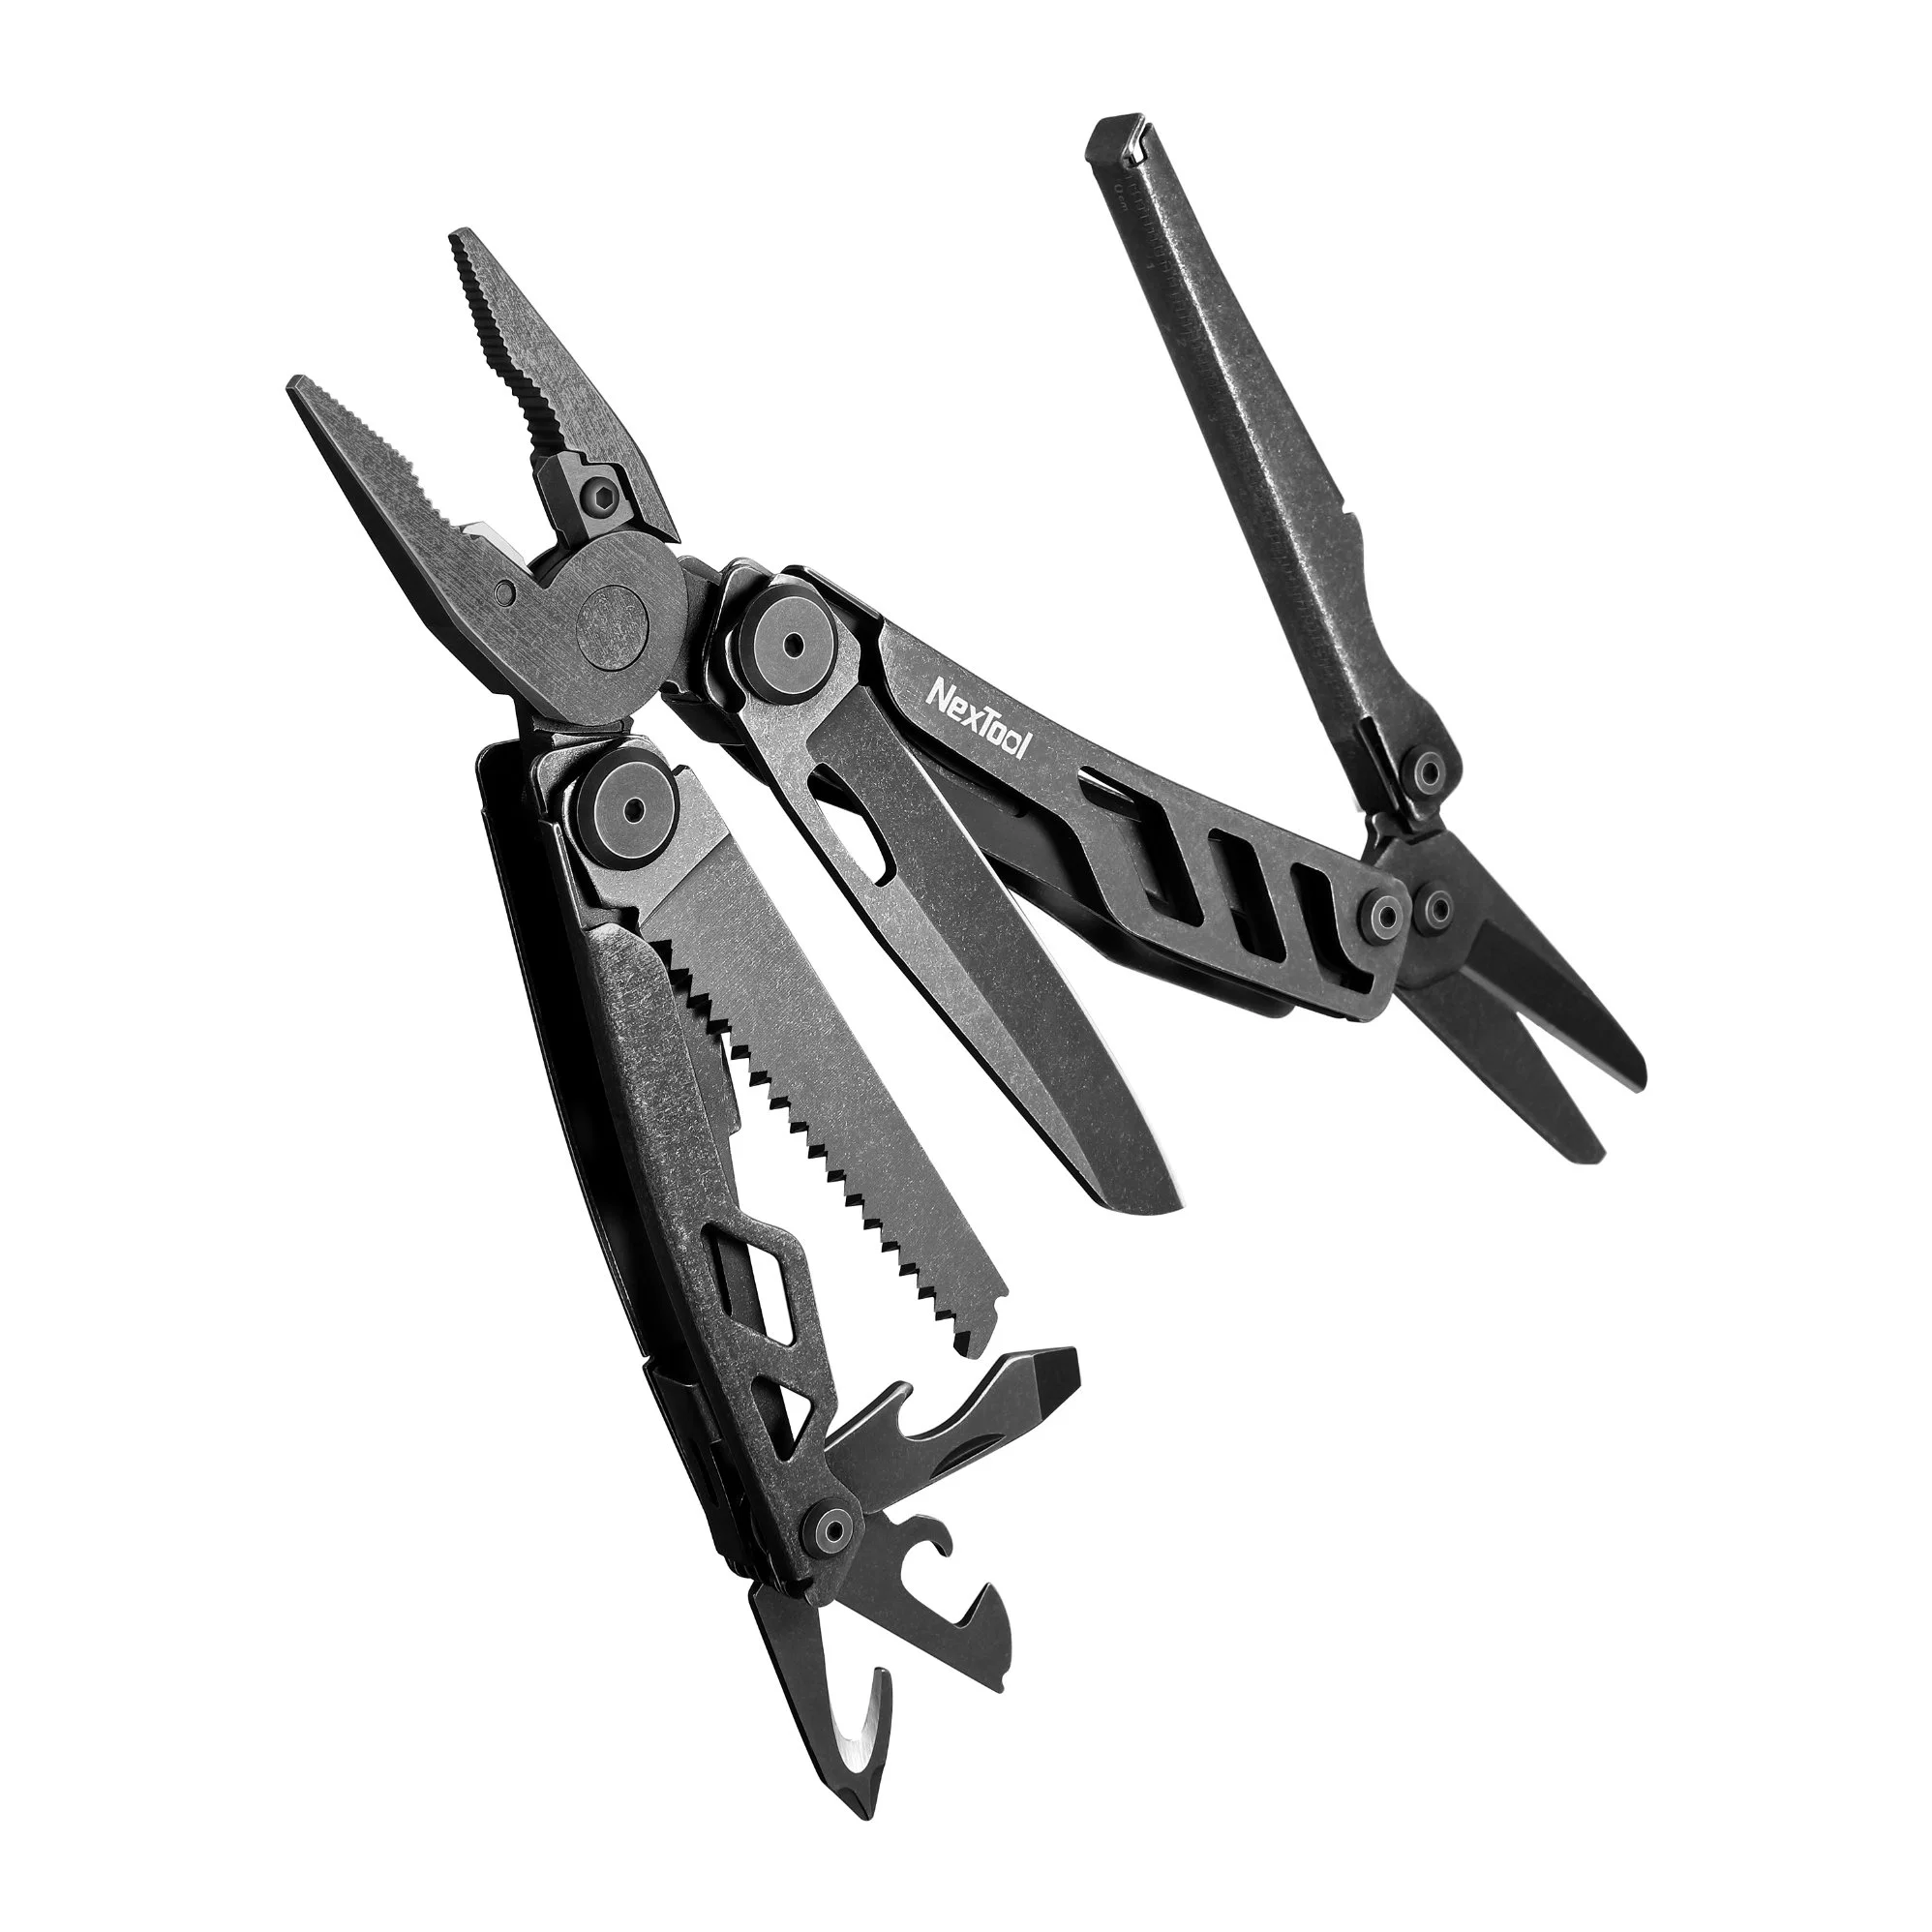 Nextool Outdoor Cutting Tool Cable Cutter Fishing Plier Multi Tool